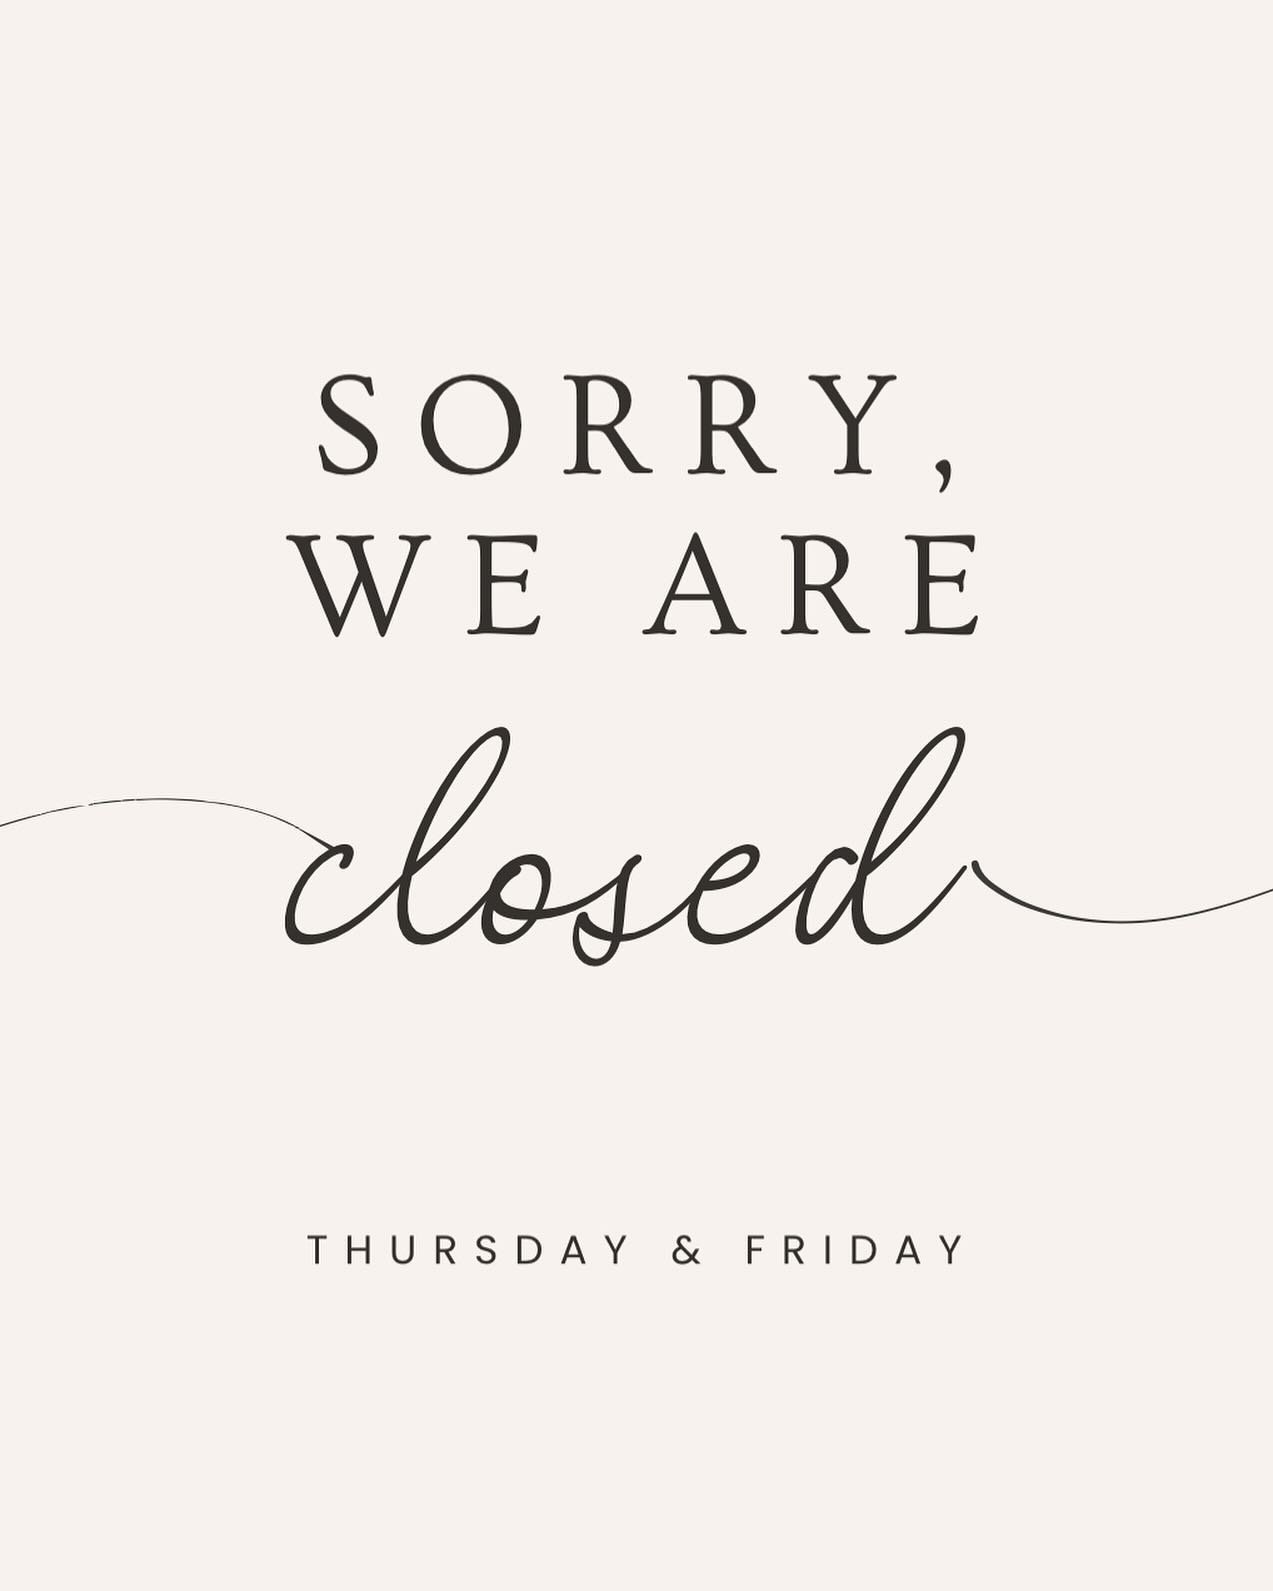 ⭐️The Market and the Restaurant will be closed all day this Thursday and Friday! ⭐️

We will be open Wednesday, Saturday, and Sunday for lunch and brunch!!

Call (830) 238-3737 for a lunch or brunch reservation!